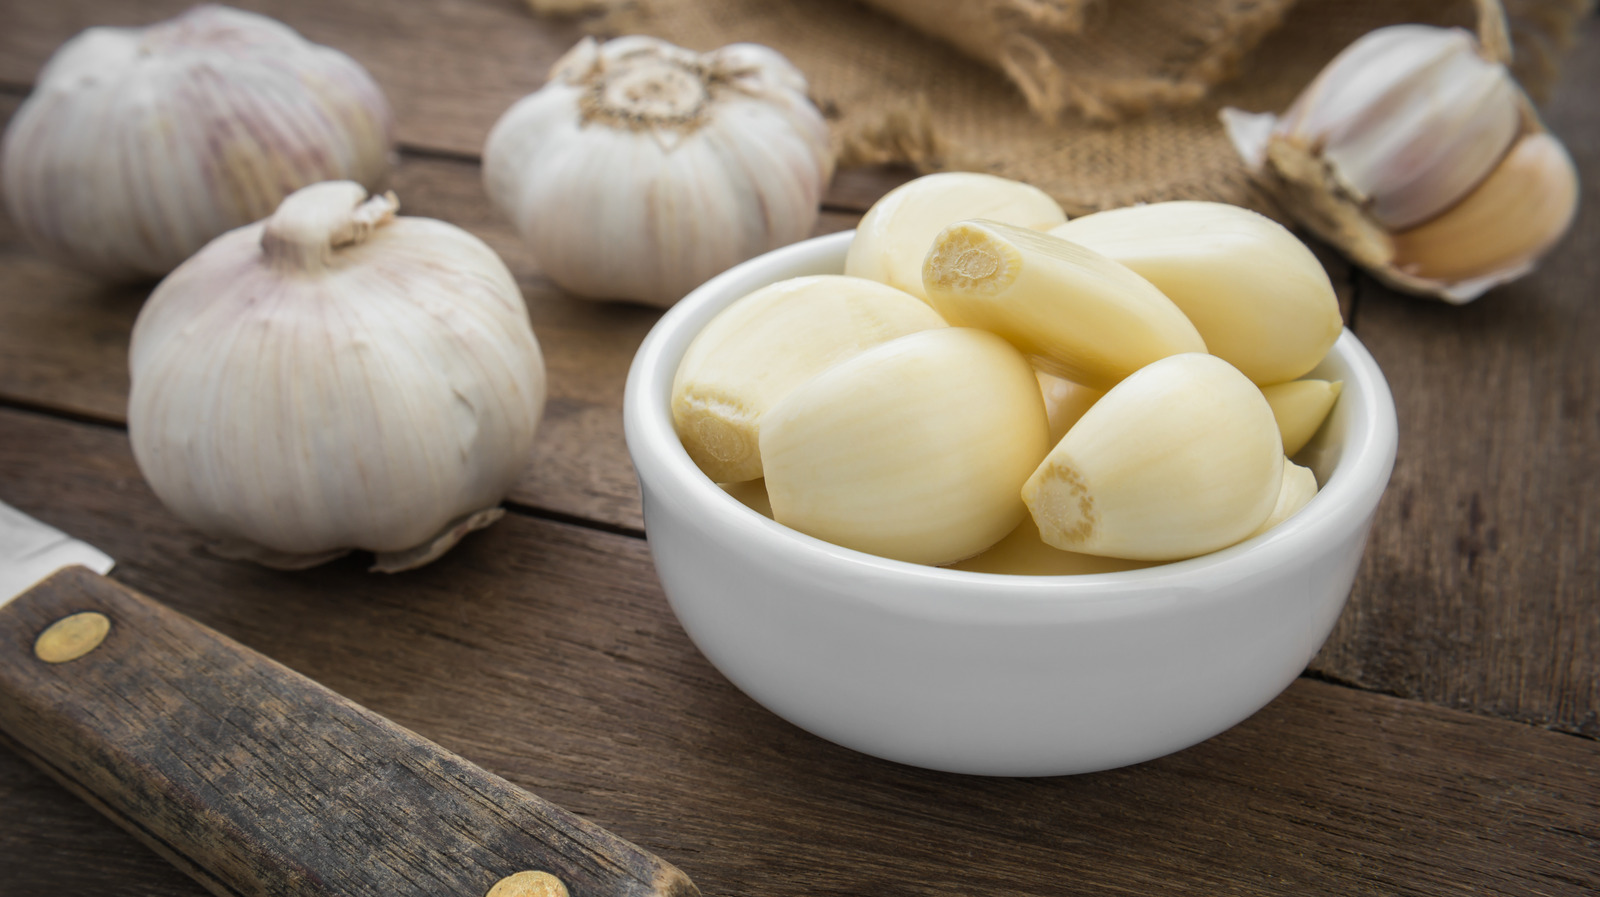 The Simple Way To Tame The Strong Taste Of Raw Garlic